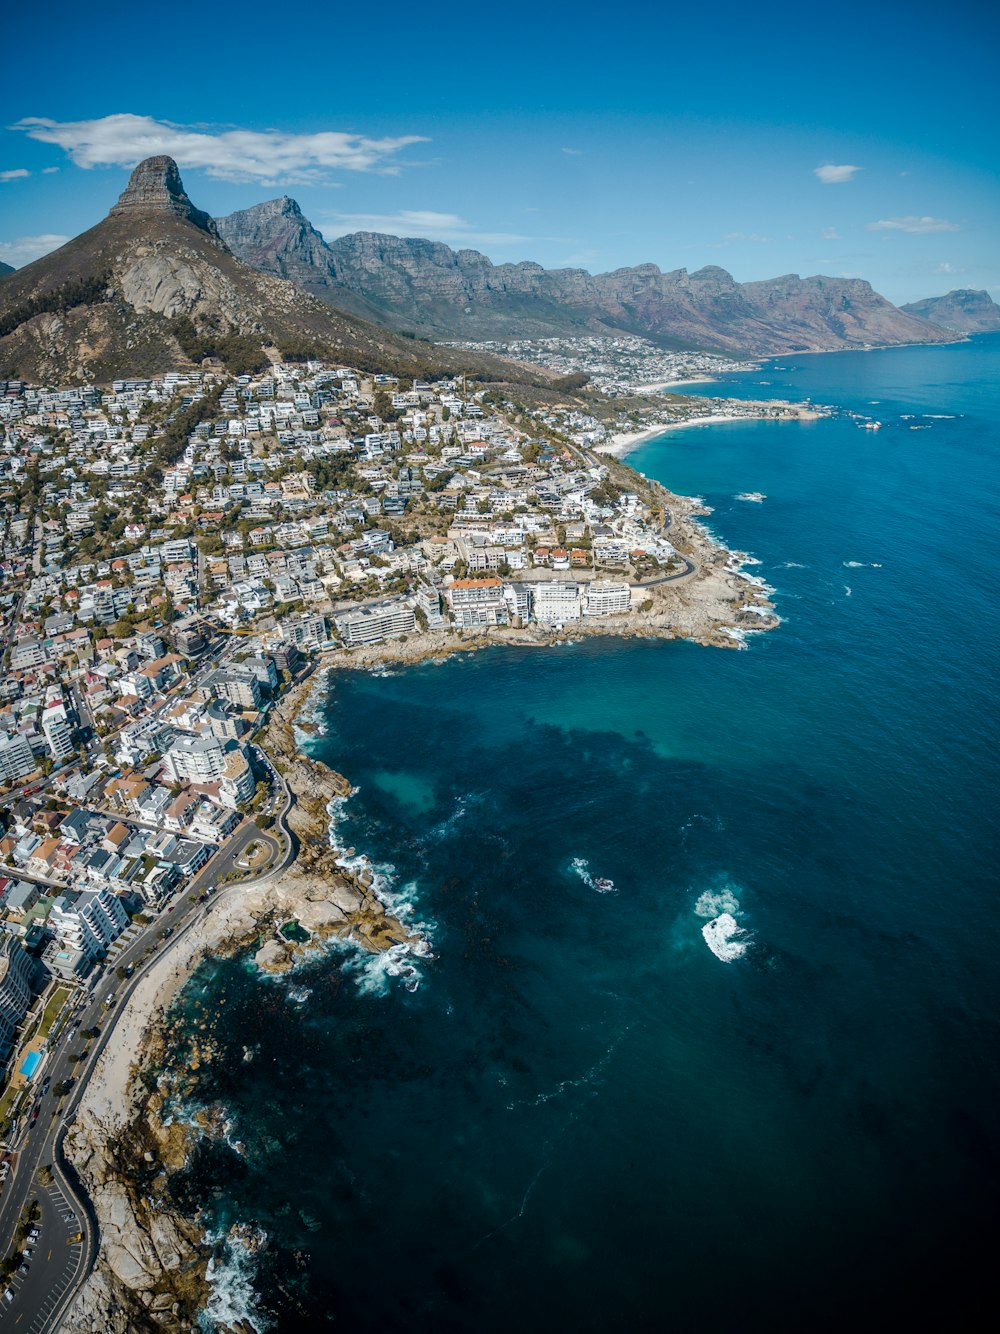 500 Cape Town Pictures Stunning Download Free Images On Unsplash In this man made collection we have 19 wallpapers. 500 cape town pictures stunning